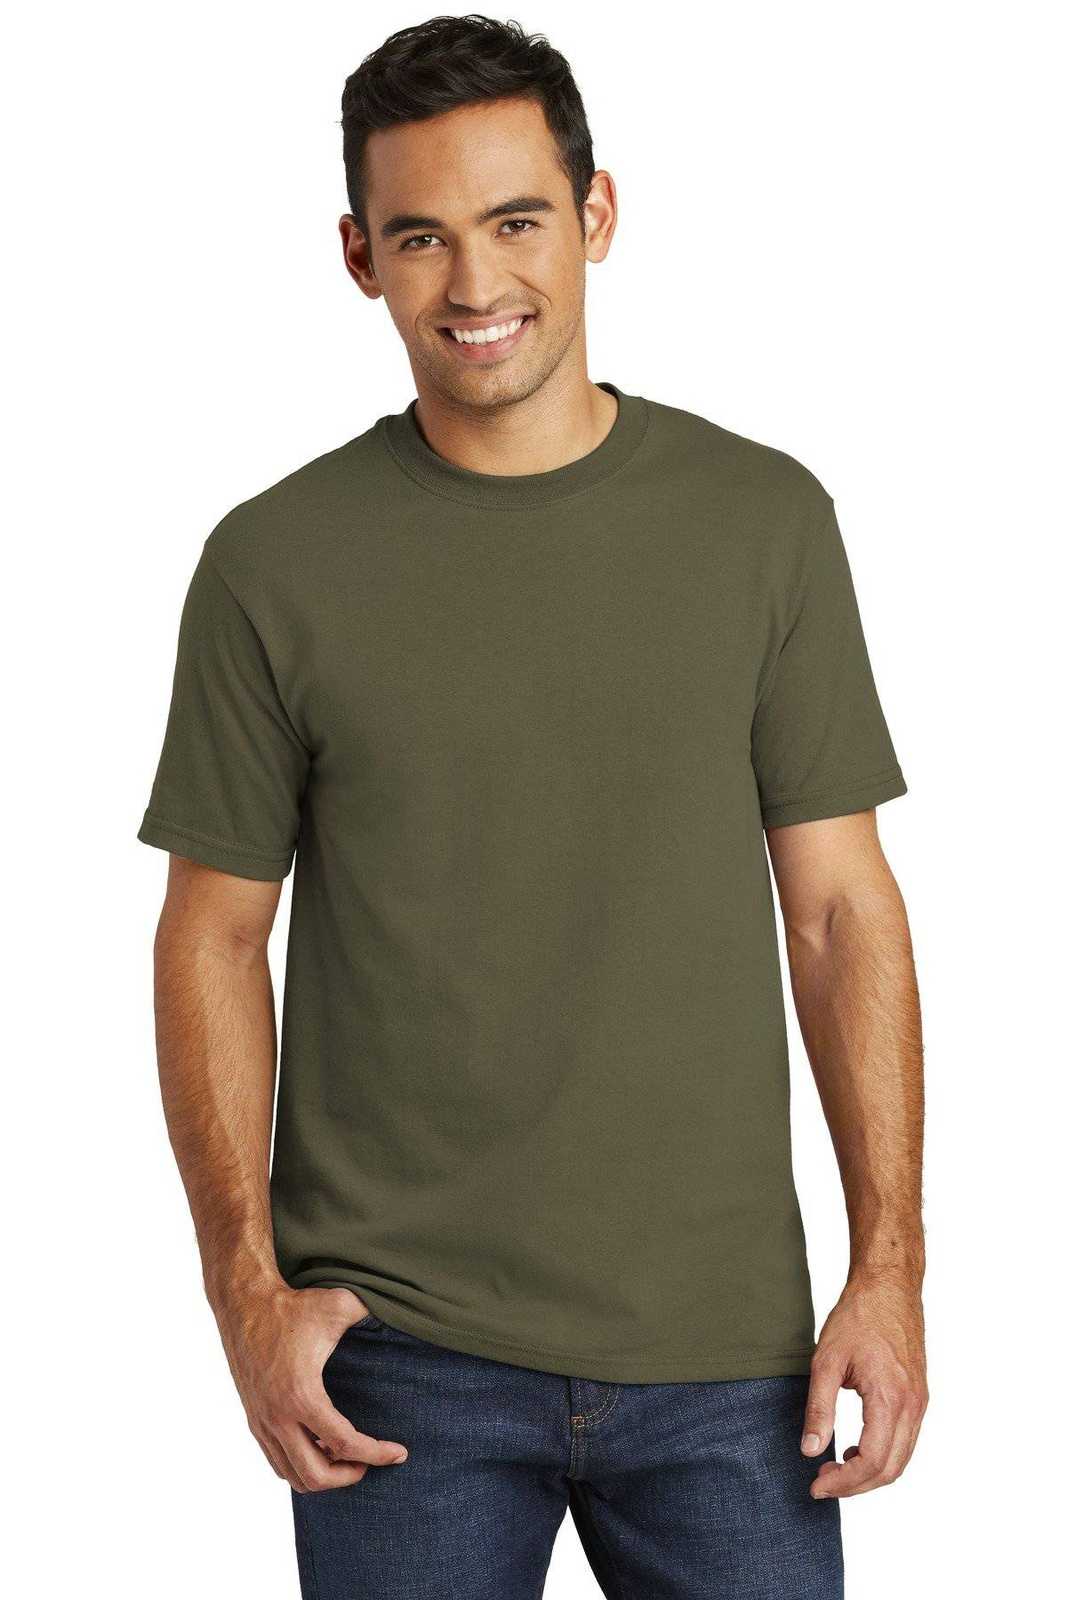 Port & Company USA100 All-American Tee - Olive Drab Green - HIT a Double - 1